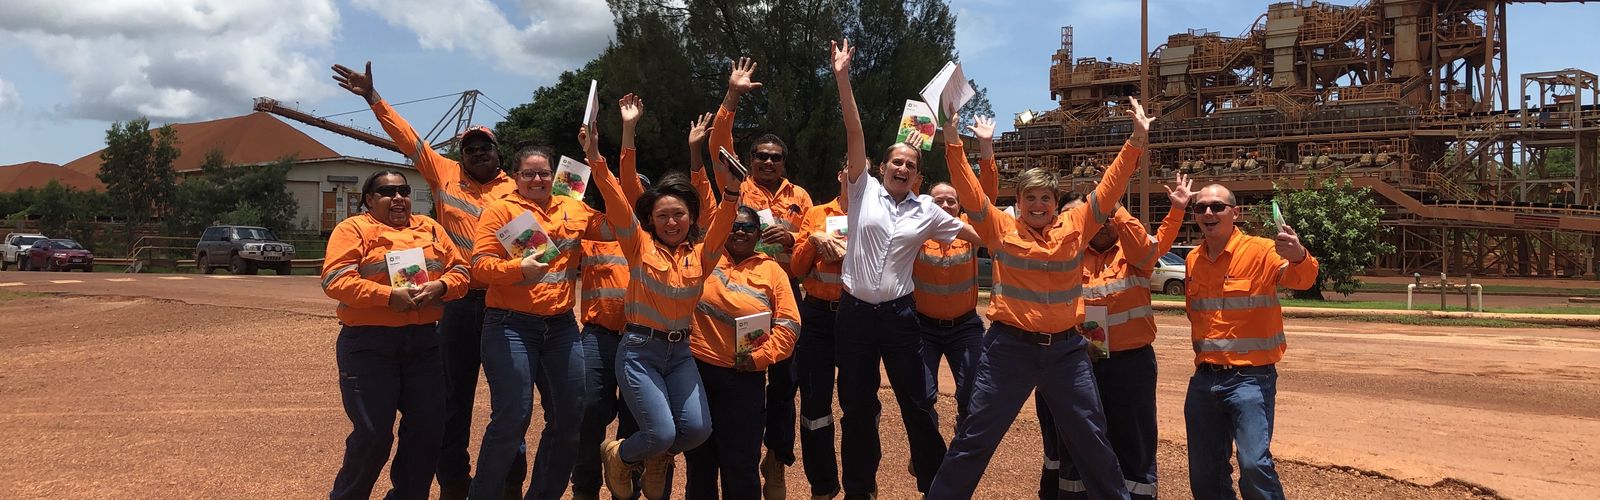 Rio Tinto staff jumping with joy after mental health training in February.